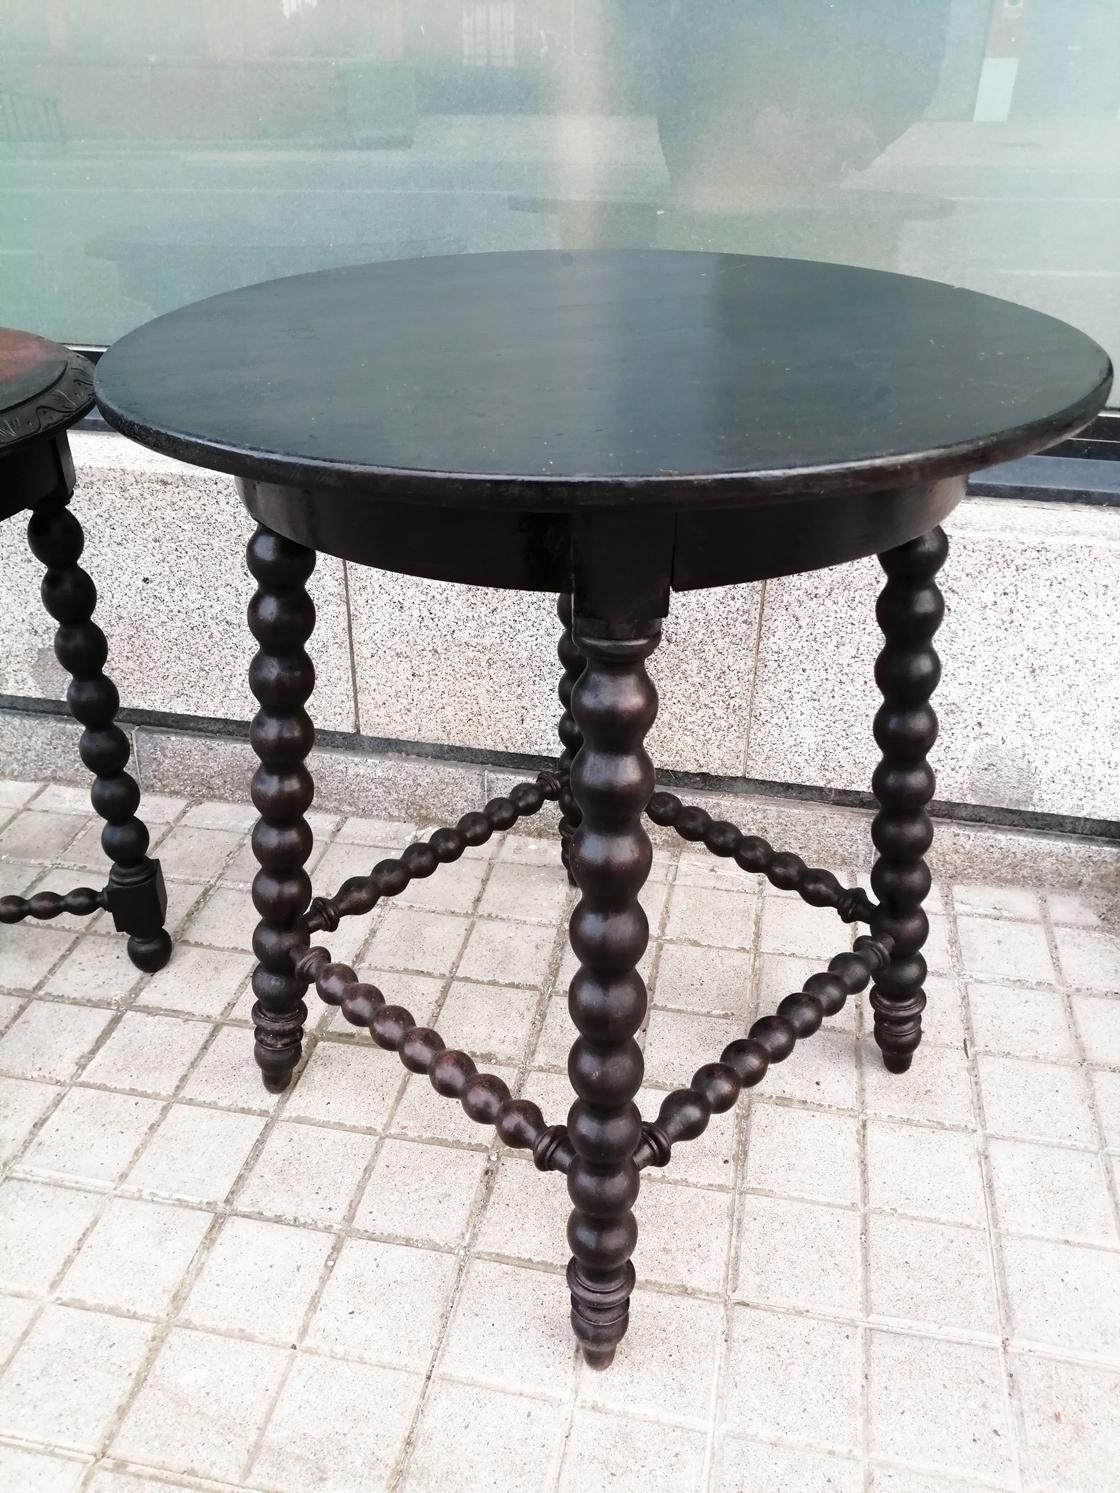 Victorian Antique Round Side Table from the 19th Ceas ntury Bobbin Turned Legs